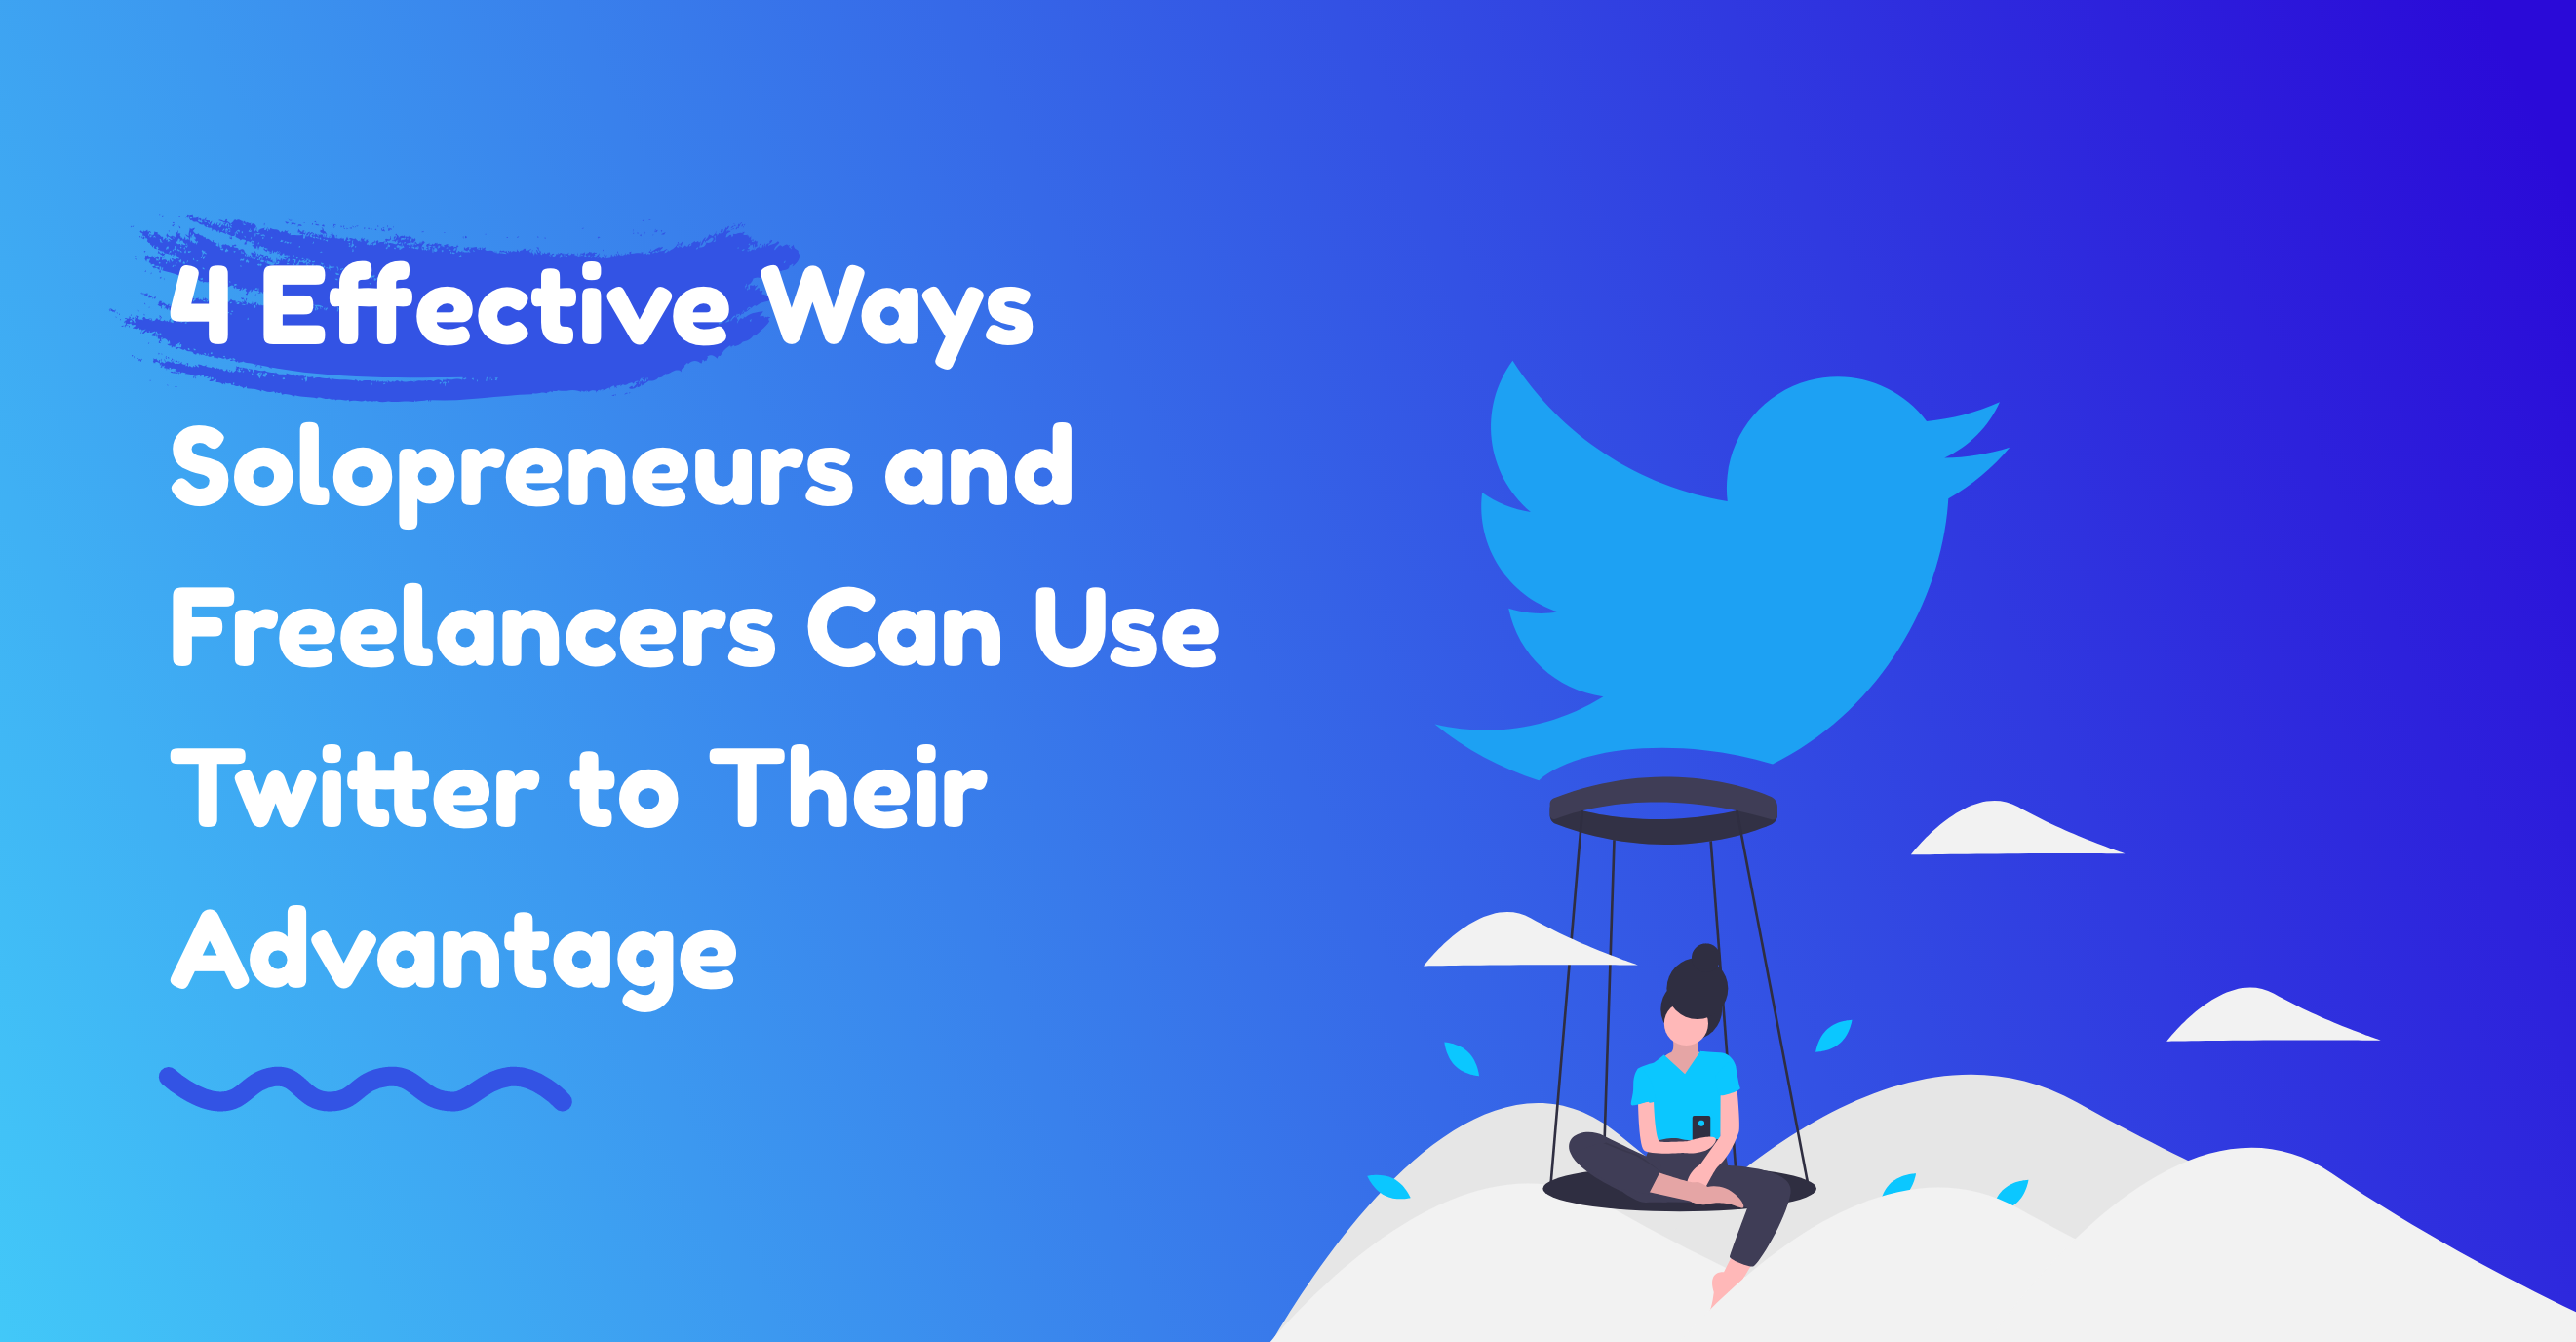 4 Effective Ways Solopreneurs and Freelancers Can Use Twitter to Their Advantage